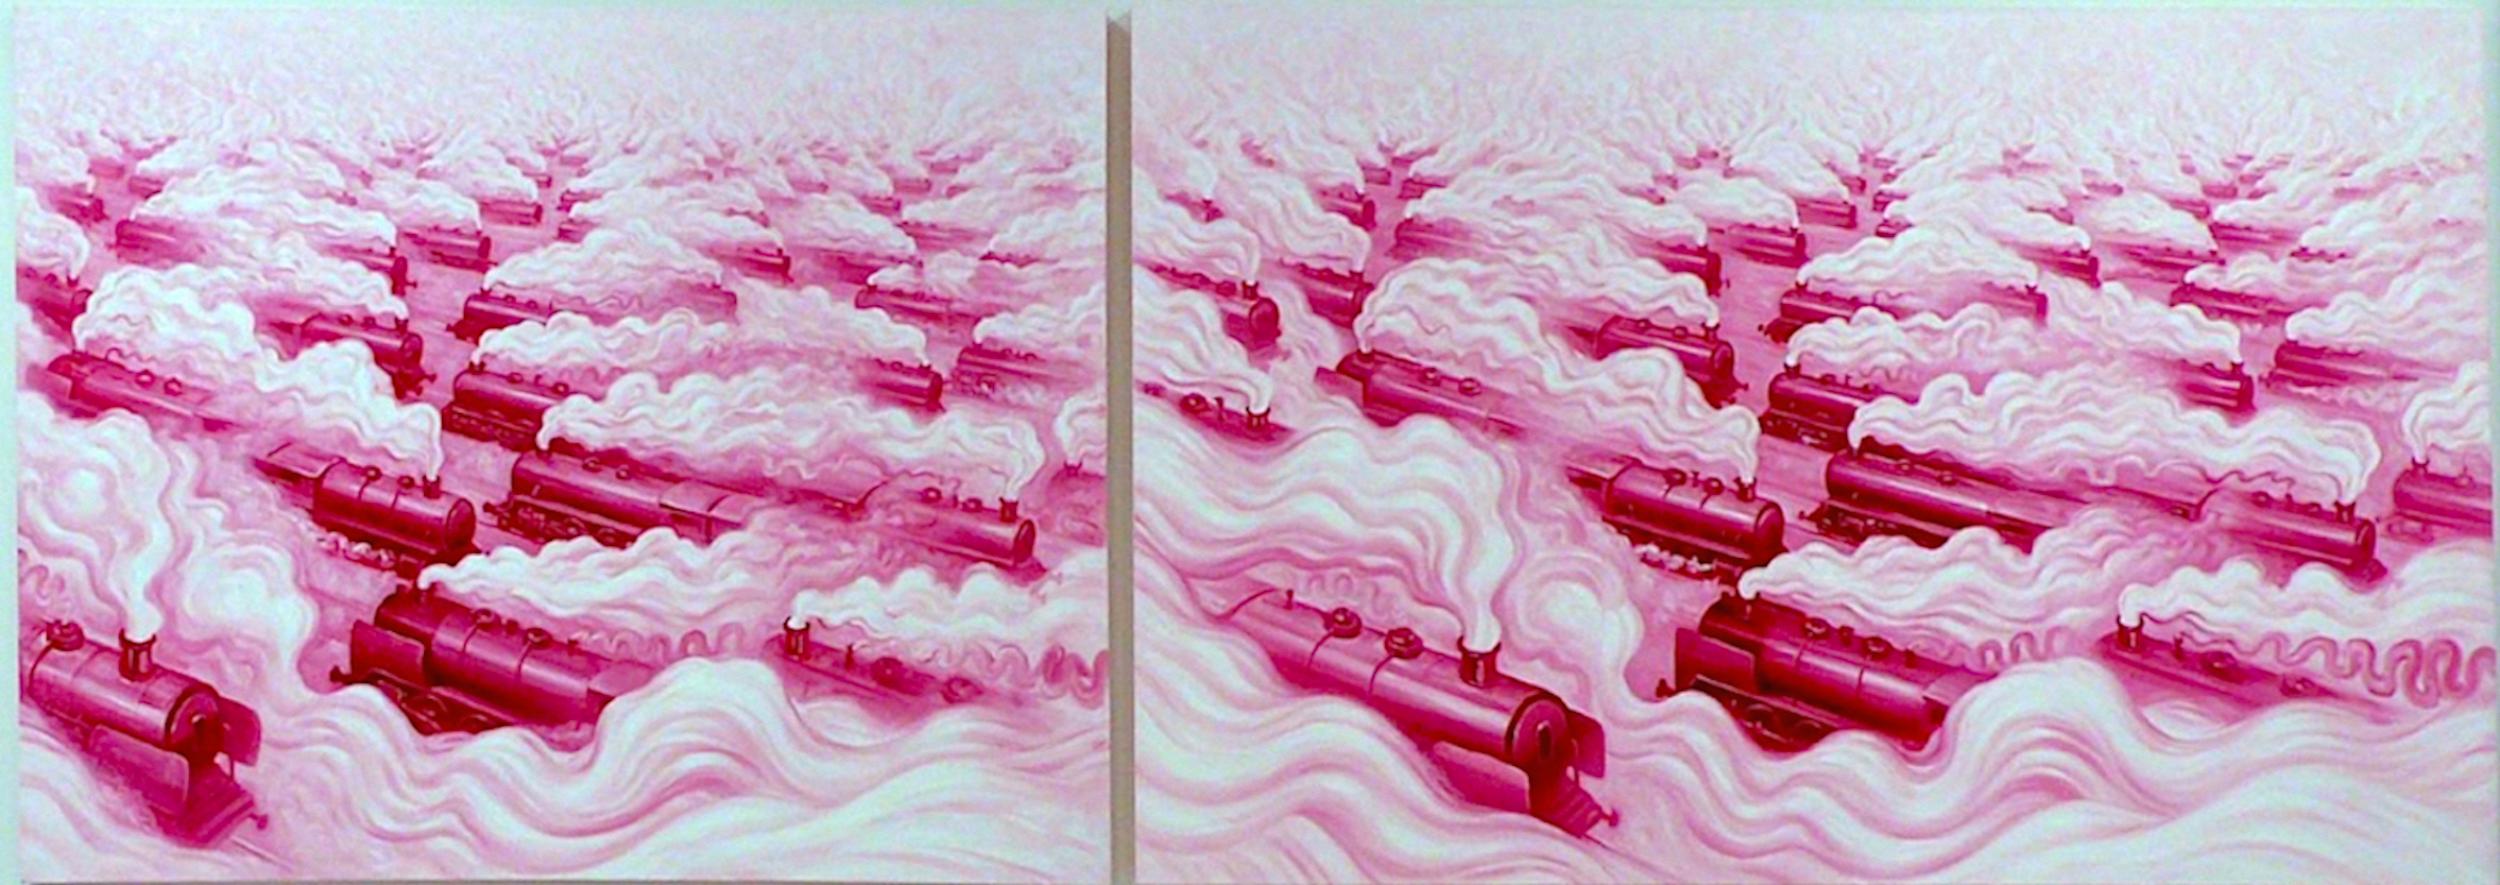 ANDRE VON MORISSE, Pink Freud's Dream Pink Freud and the Pleasant Horizon, 2012 For Sale 4